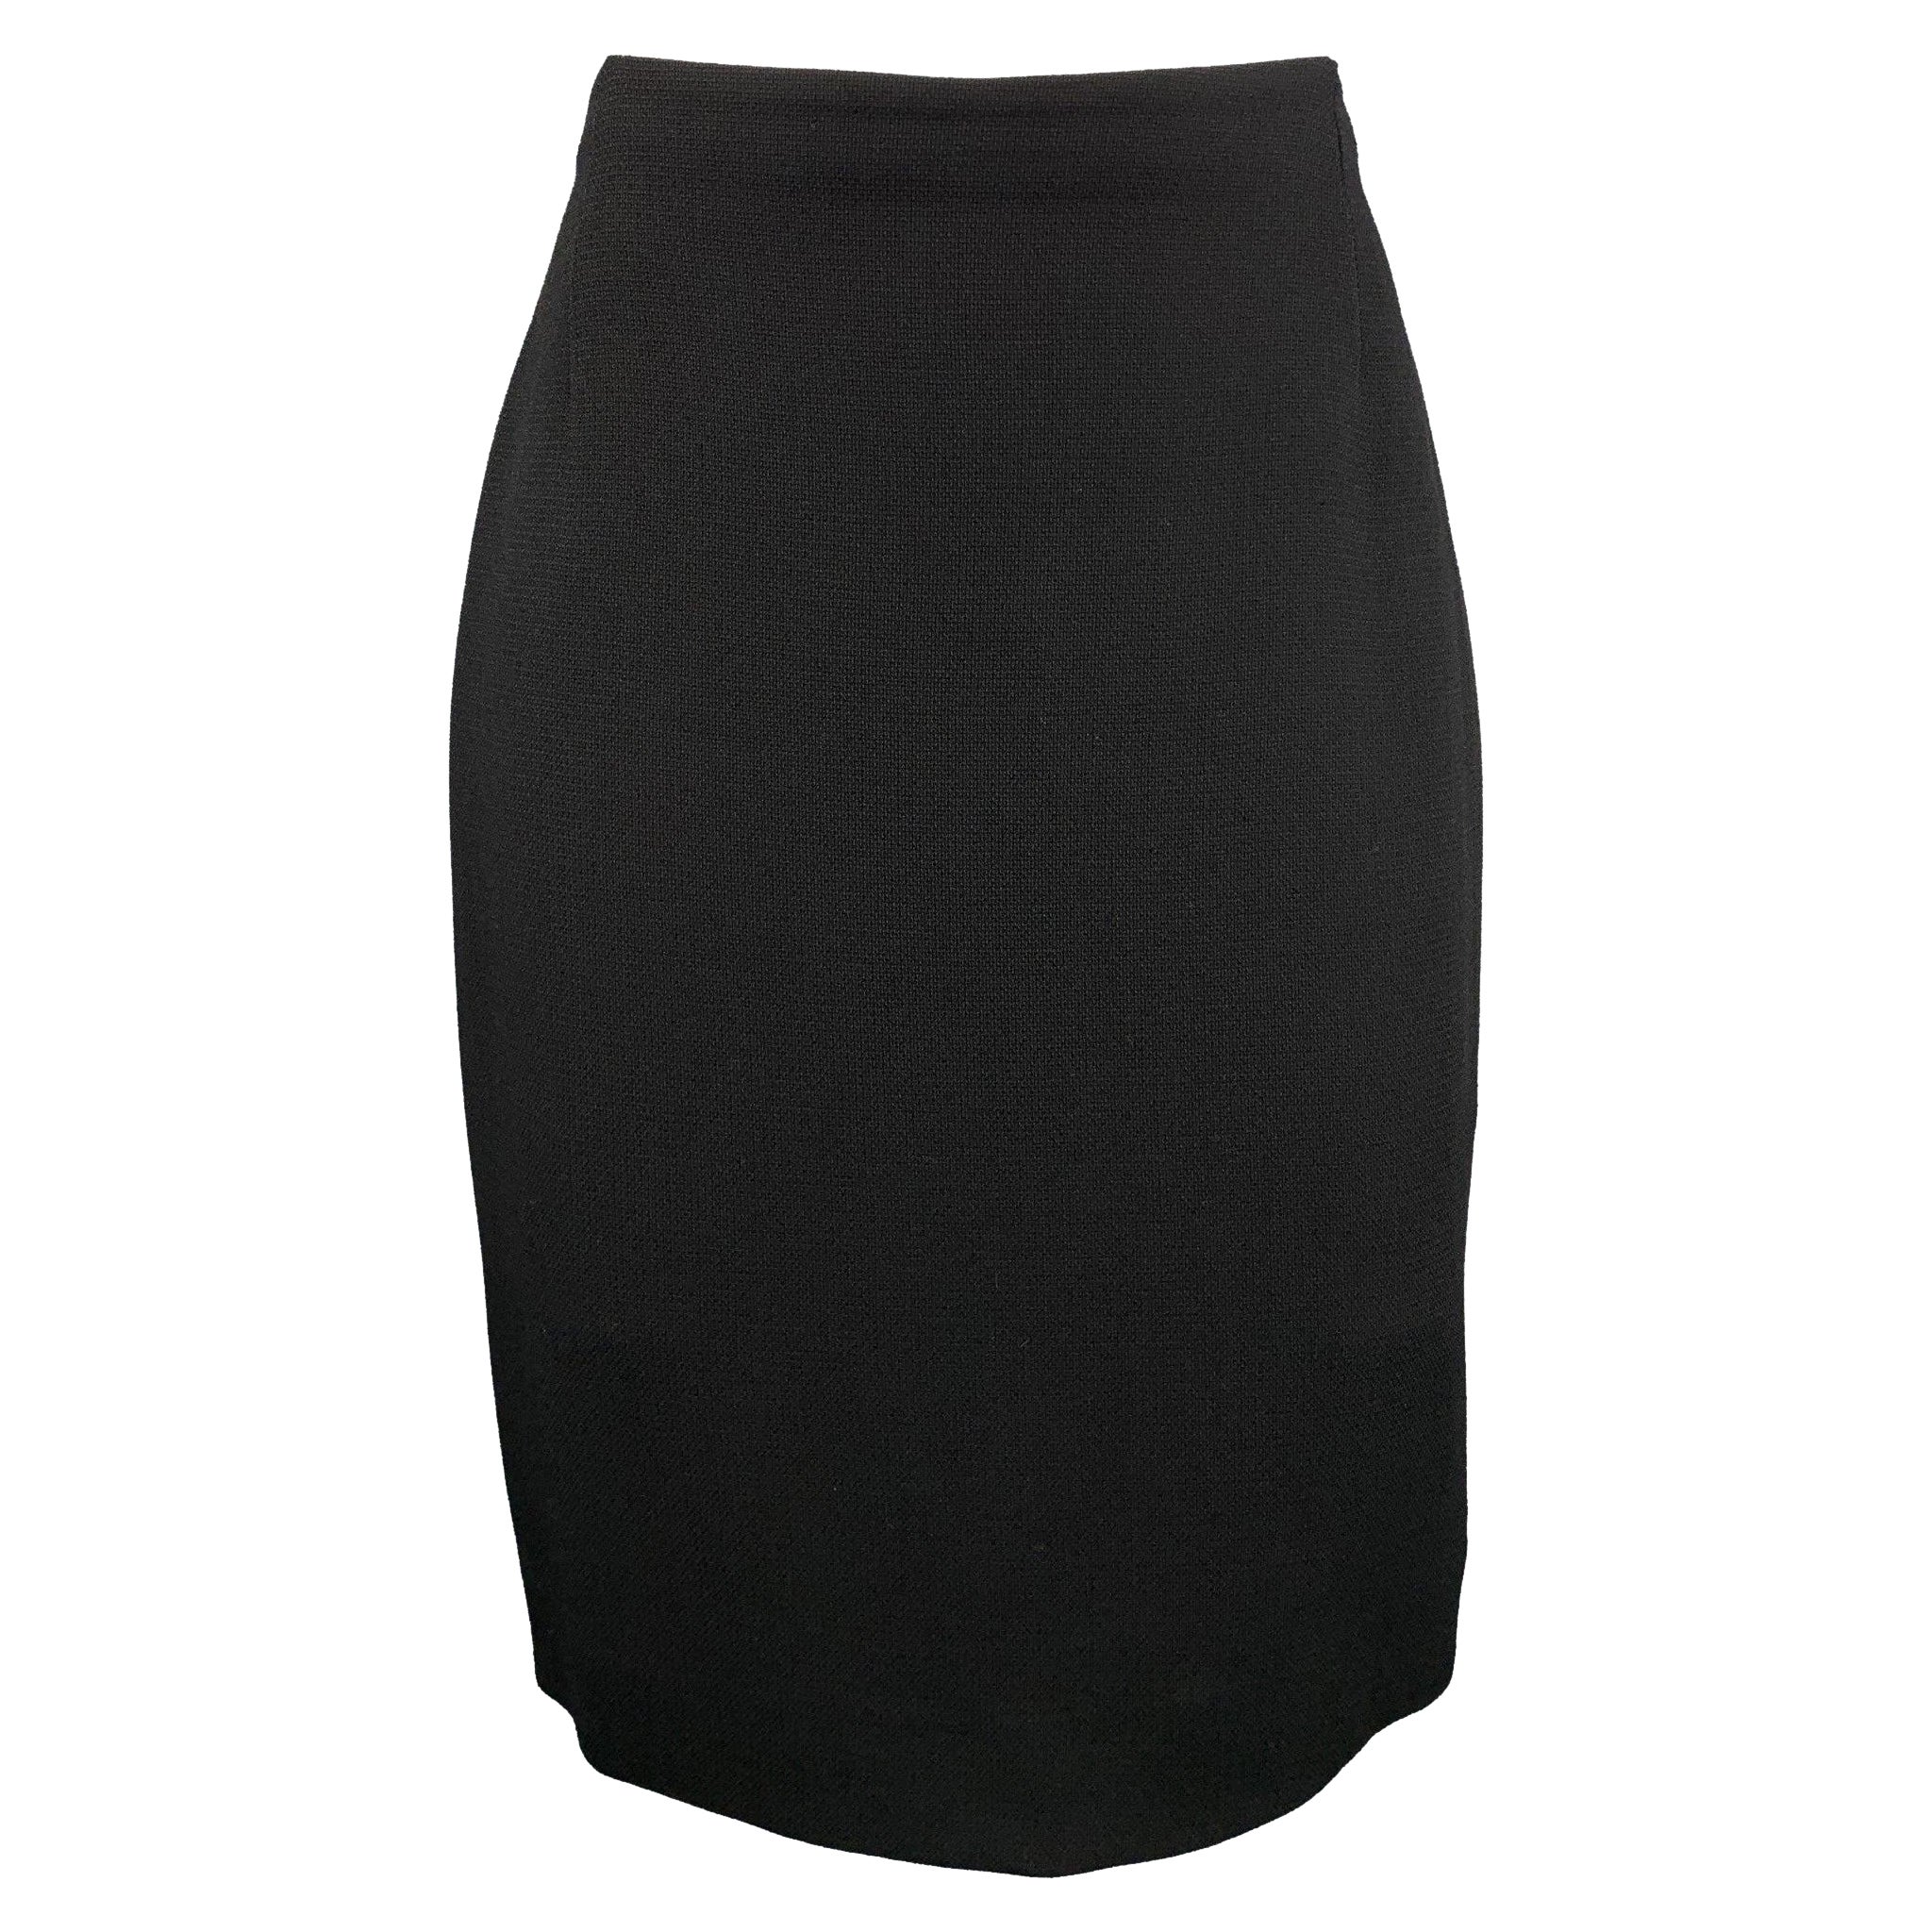 GIANNI VERSACE Size 8 Black Textured Pencil Skirt For Sale